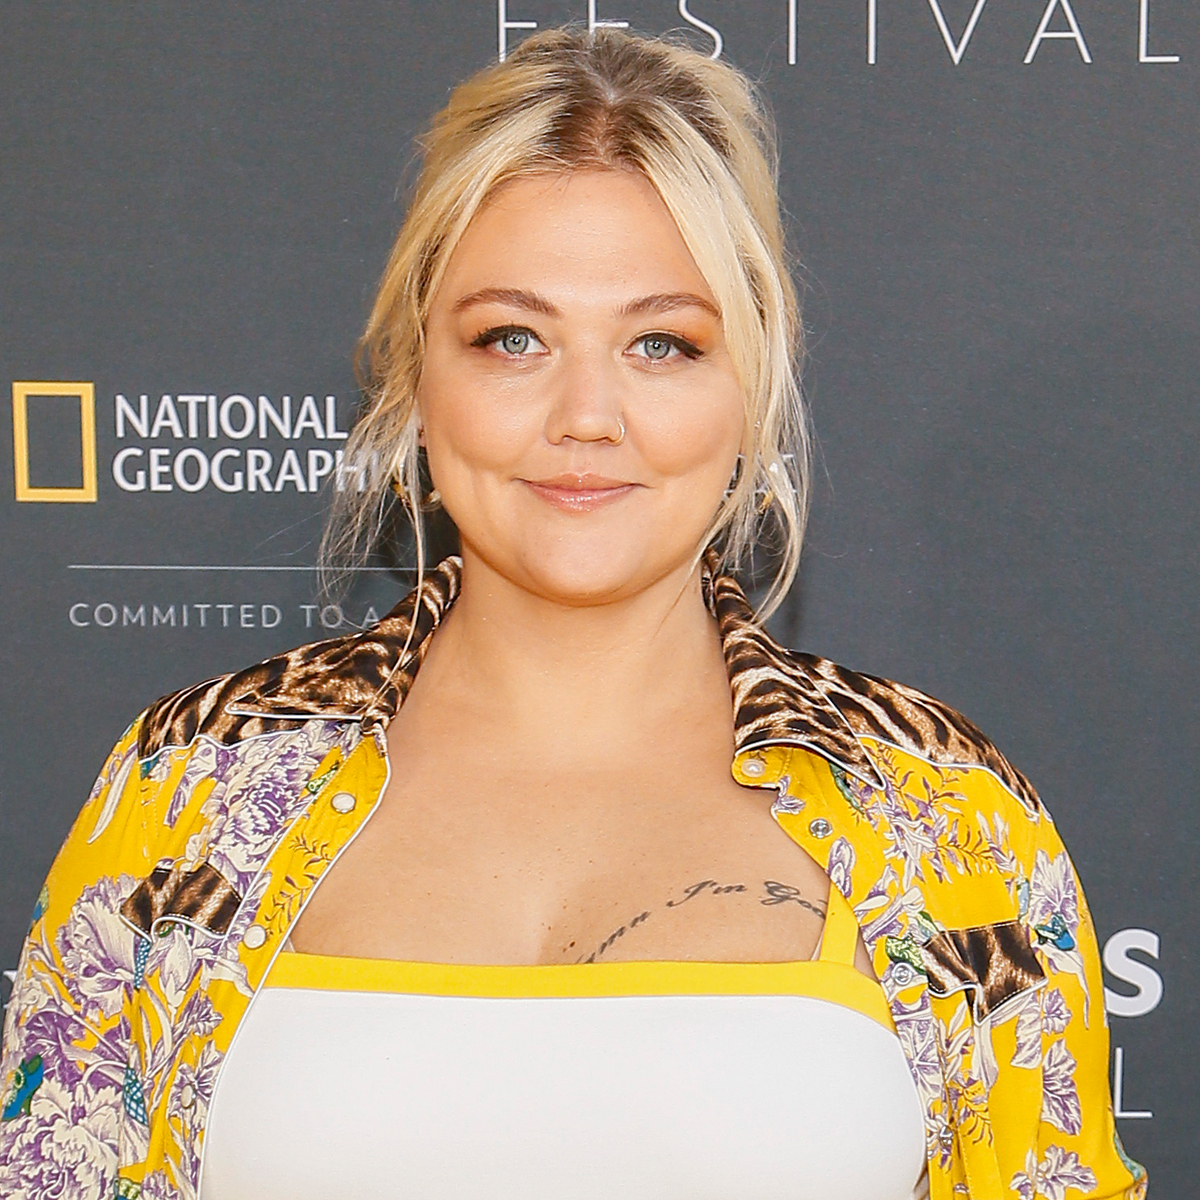 Rs 1200x1200 210303100648 1200 Elle King National Geographic Awards2019 Gj ?fit=around|1080 1080&output Quality=90&crop=1080 1080;center,top